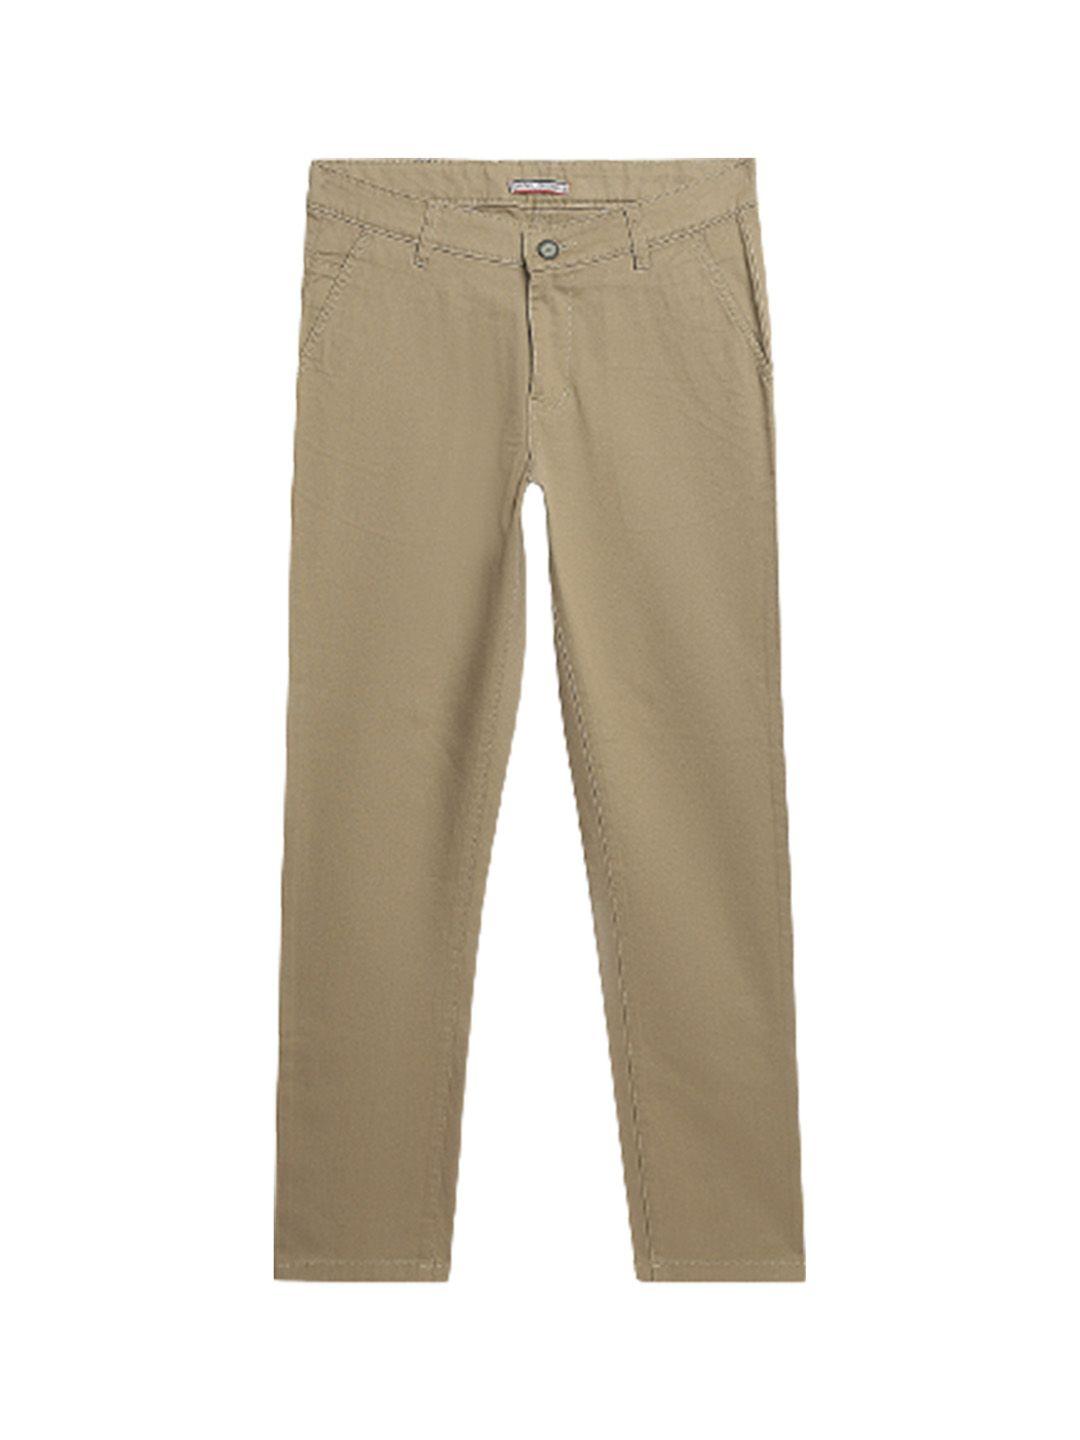 cantabil-boys-mid-rise-cotton-chinos-trousers